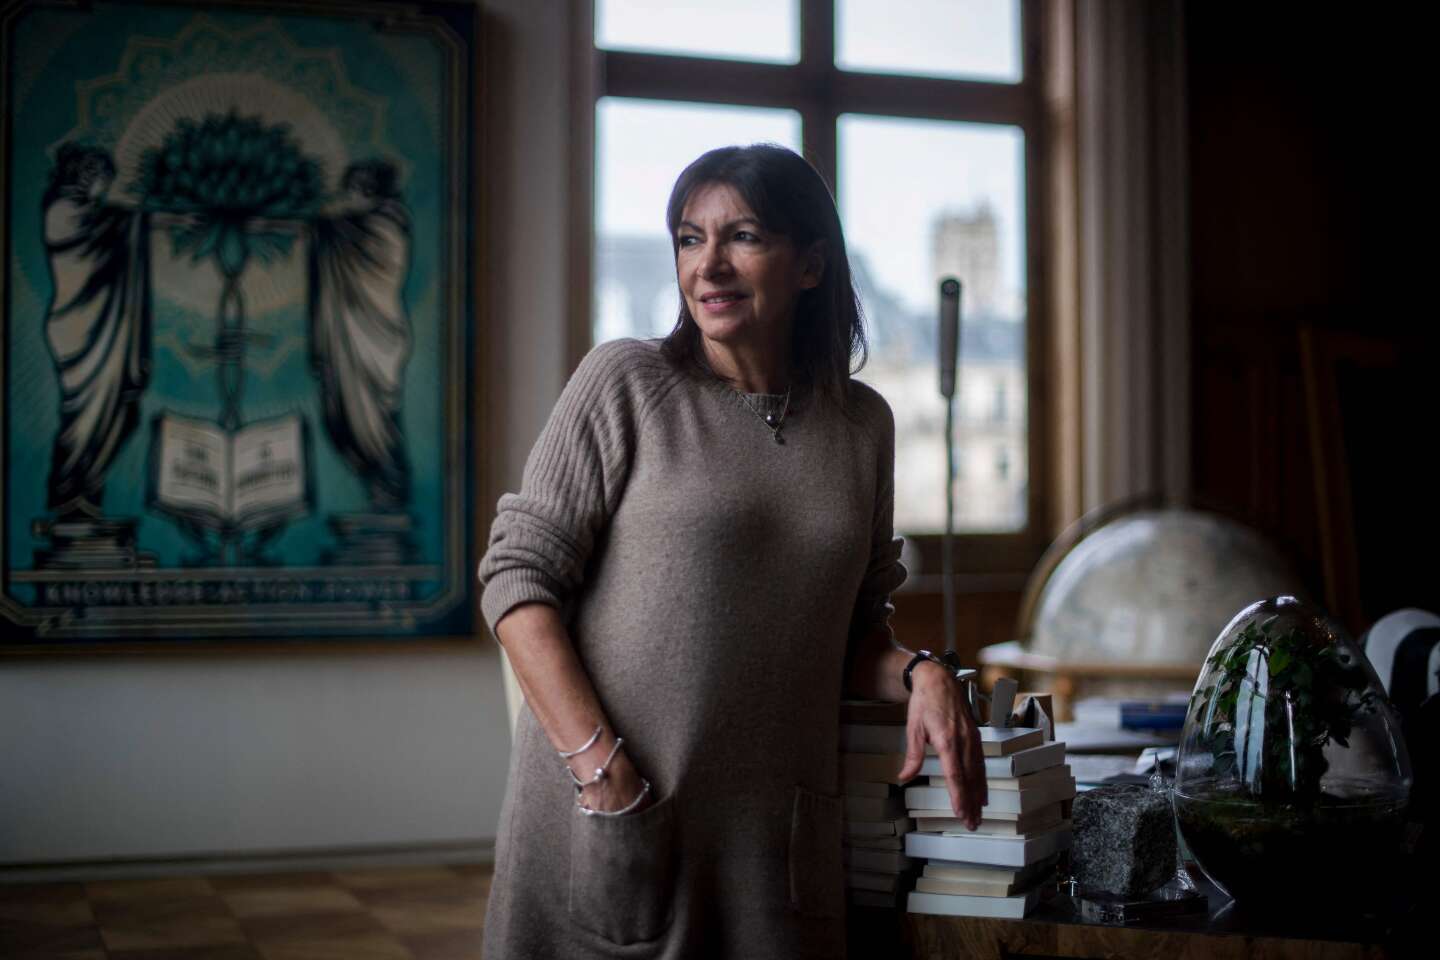 for Anne Hidalgo, who arrived mid-term, the uncertainties accumulate